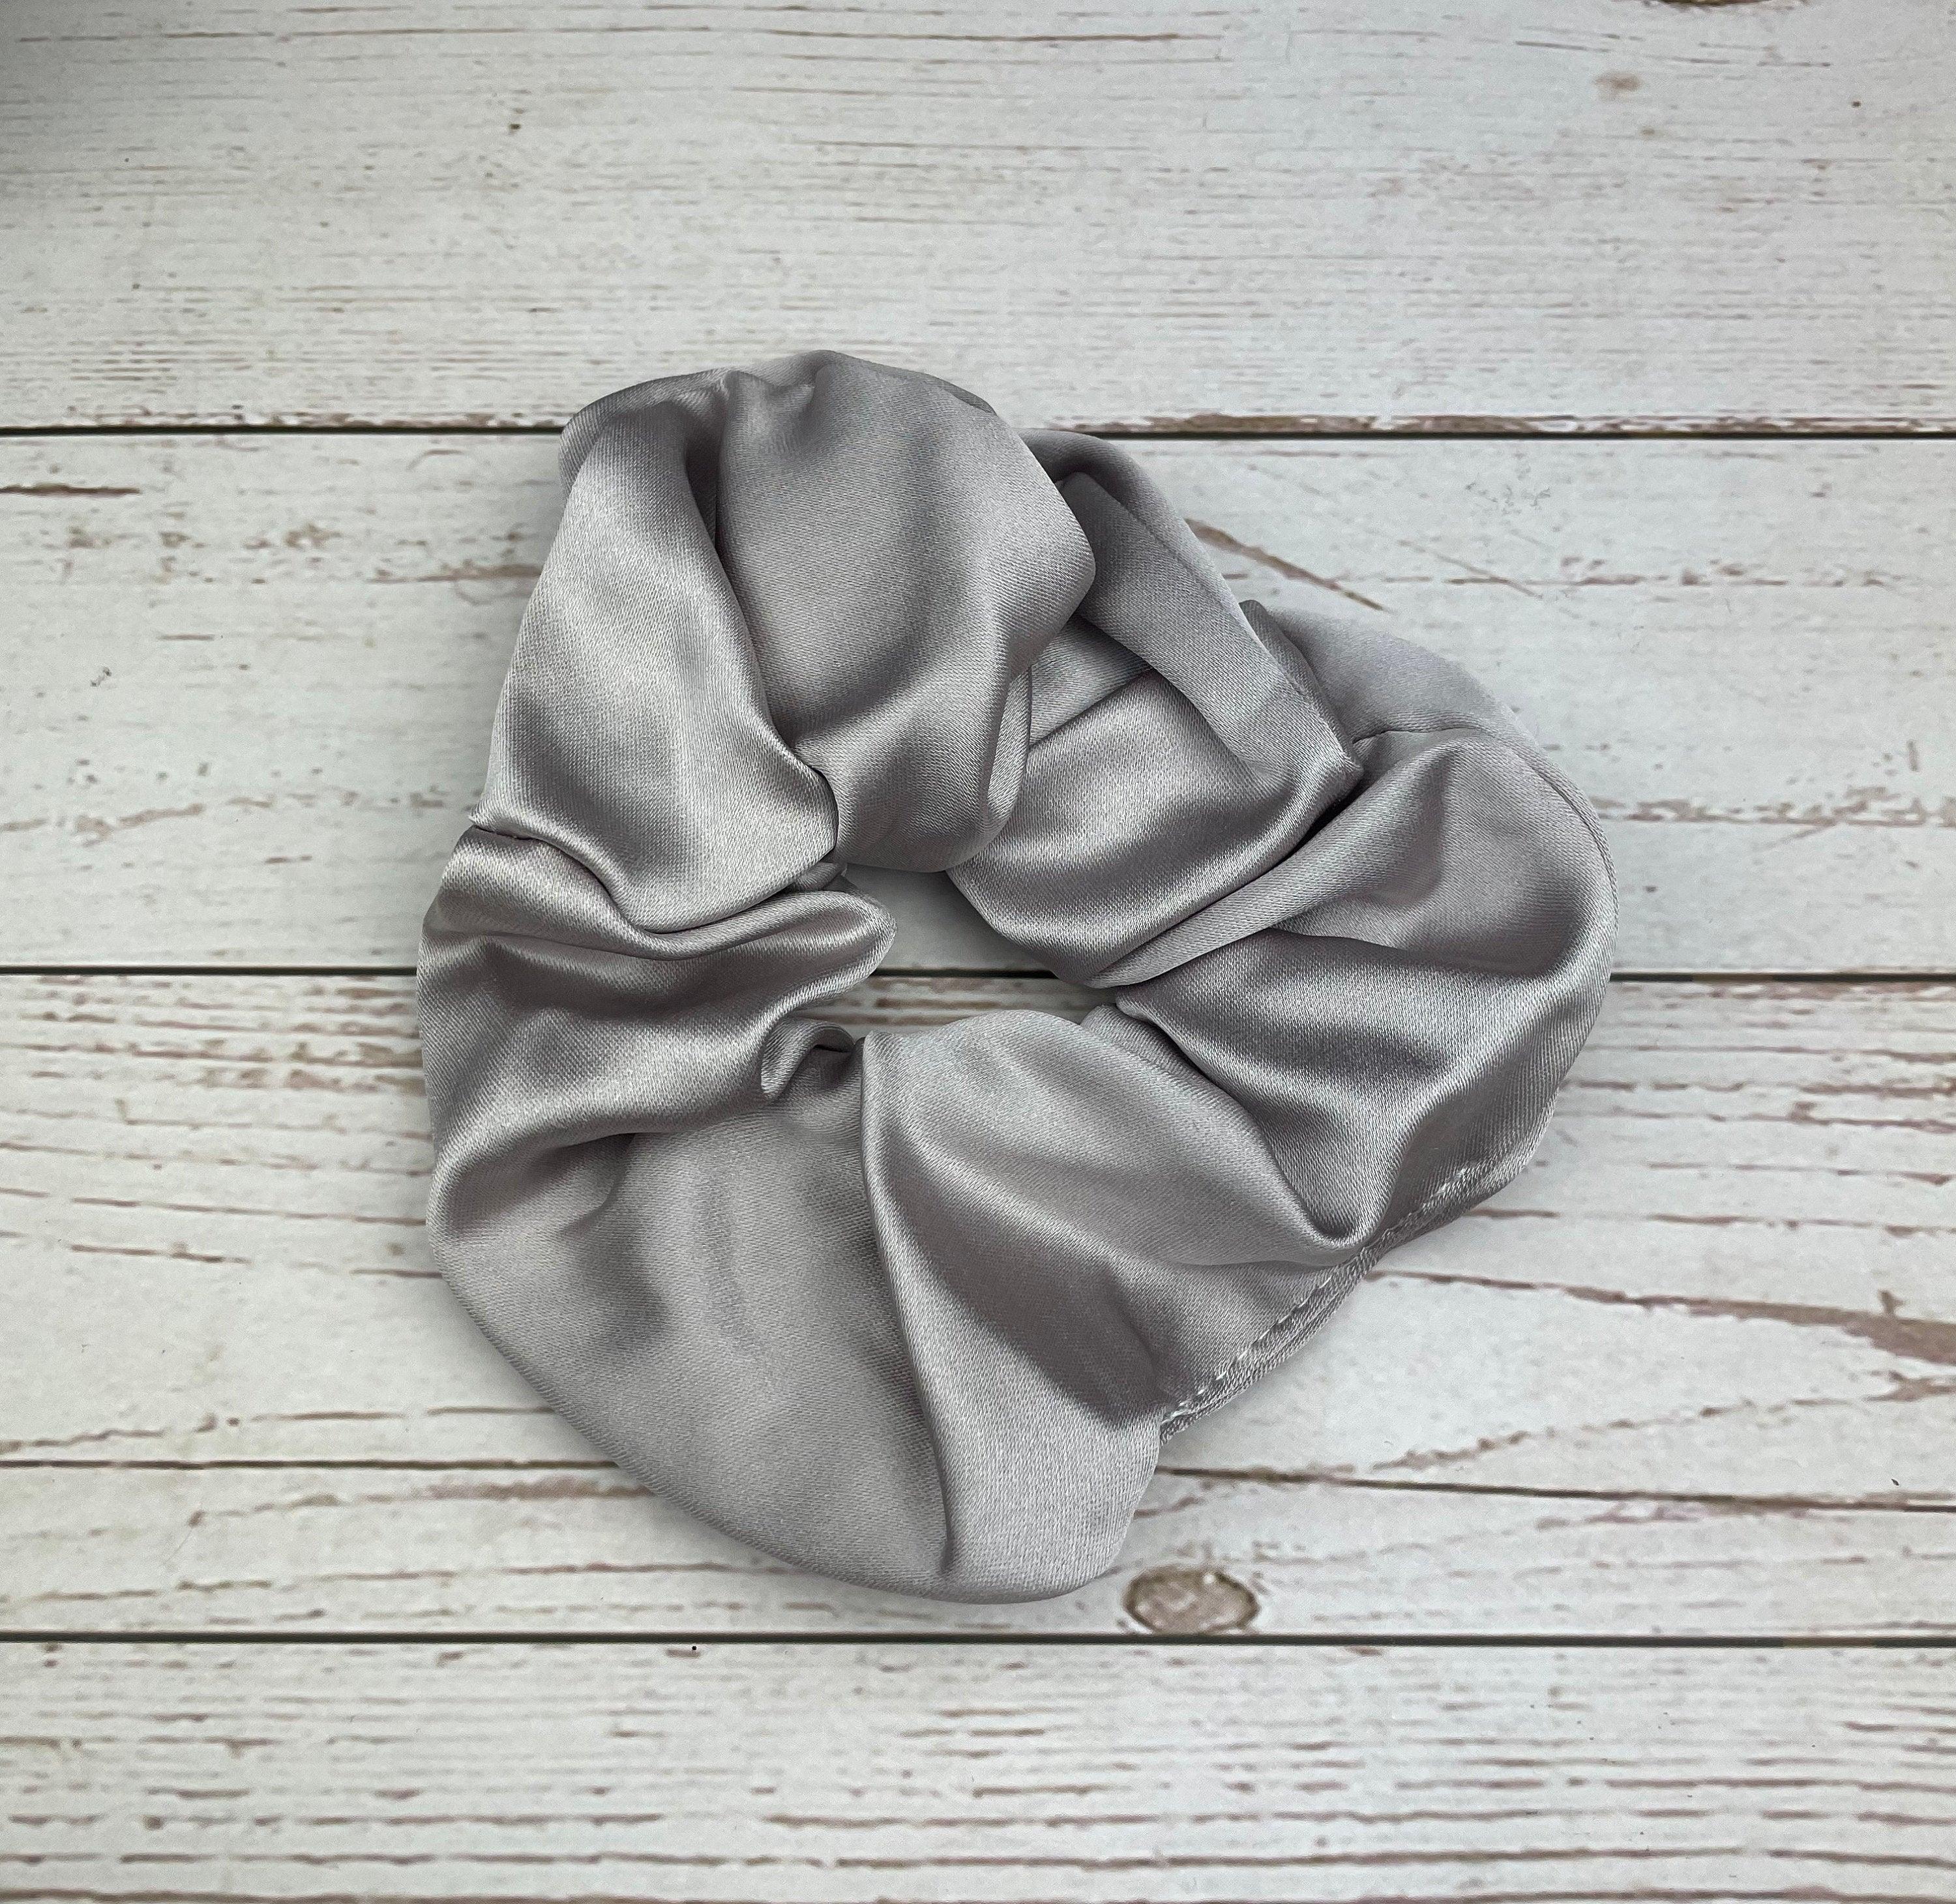 Delicate Handmade Satin Scrunchie with Bow, Colorful Scrunchie, Hair Accessory, Hair Ties, Black Beige Maroon Color Scrunchies, Satin Hairbow available at Moyoni Design